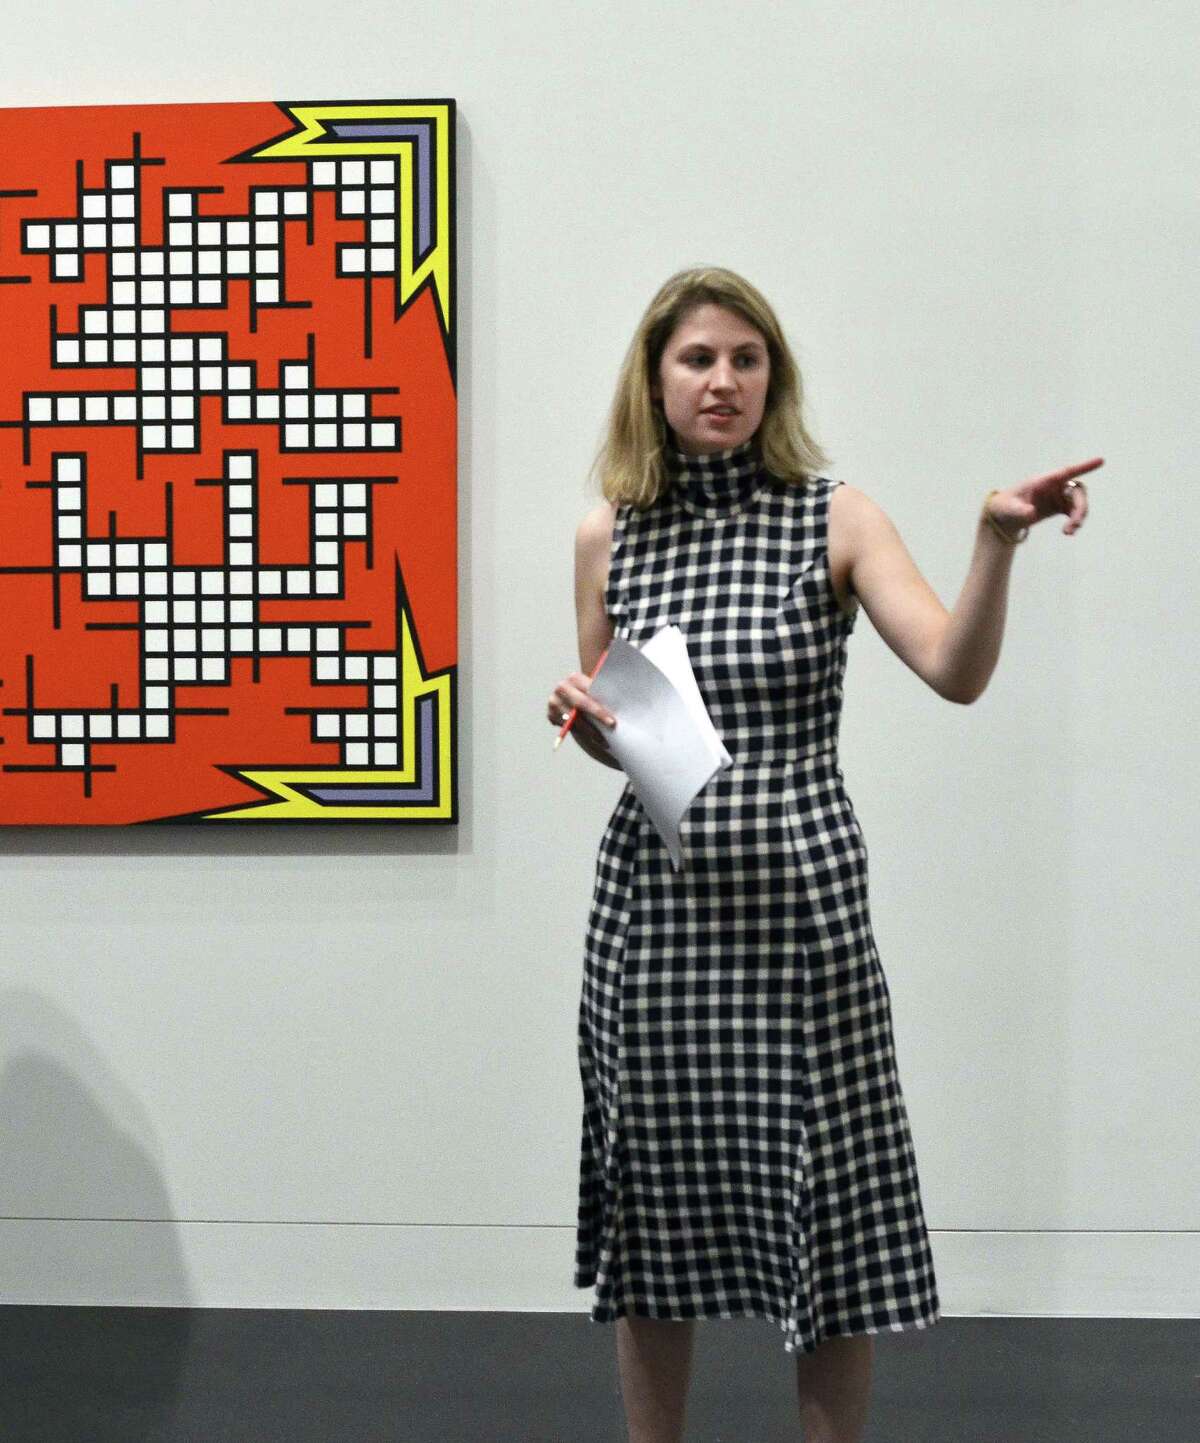 Poet Catherine Pond, who will lead a creative writing workshop during Frances Day on July 9, 2016, is shown discussing the exhibition Nicholas Krushenick ?— Electric Soup during Frances Day, July 11, 2015, at the Frances Young Tang Teaching Museum and Art Gallery at Skidmore College. (Tang Teaching Museum photo by Andrzej Pilarczyk)